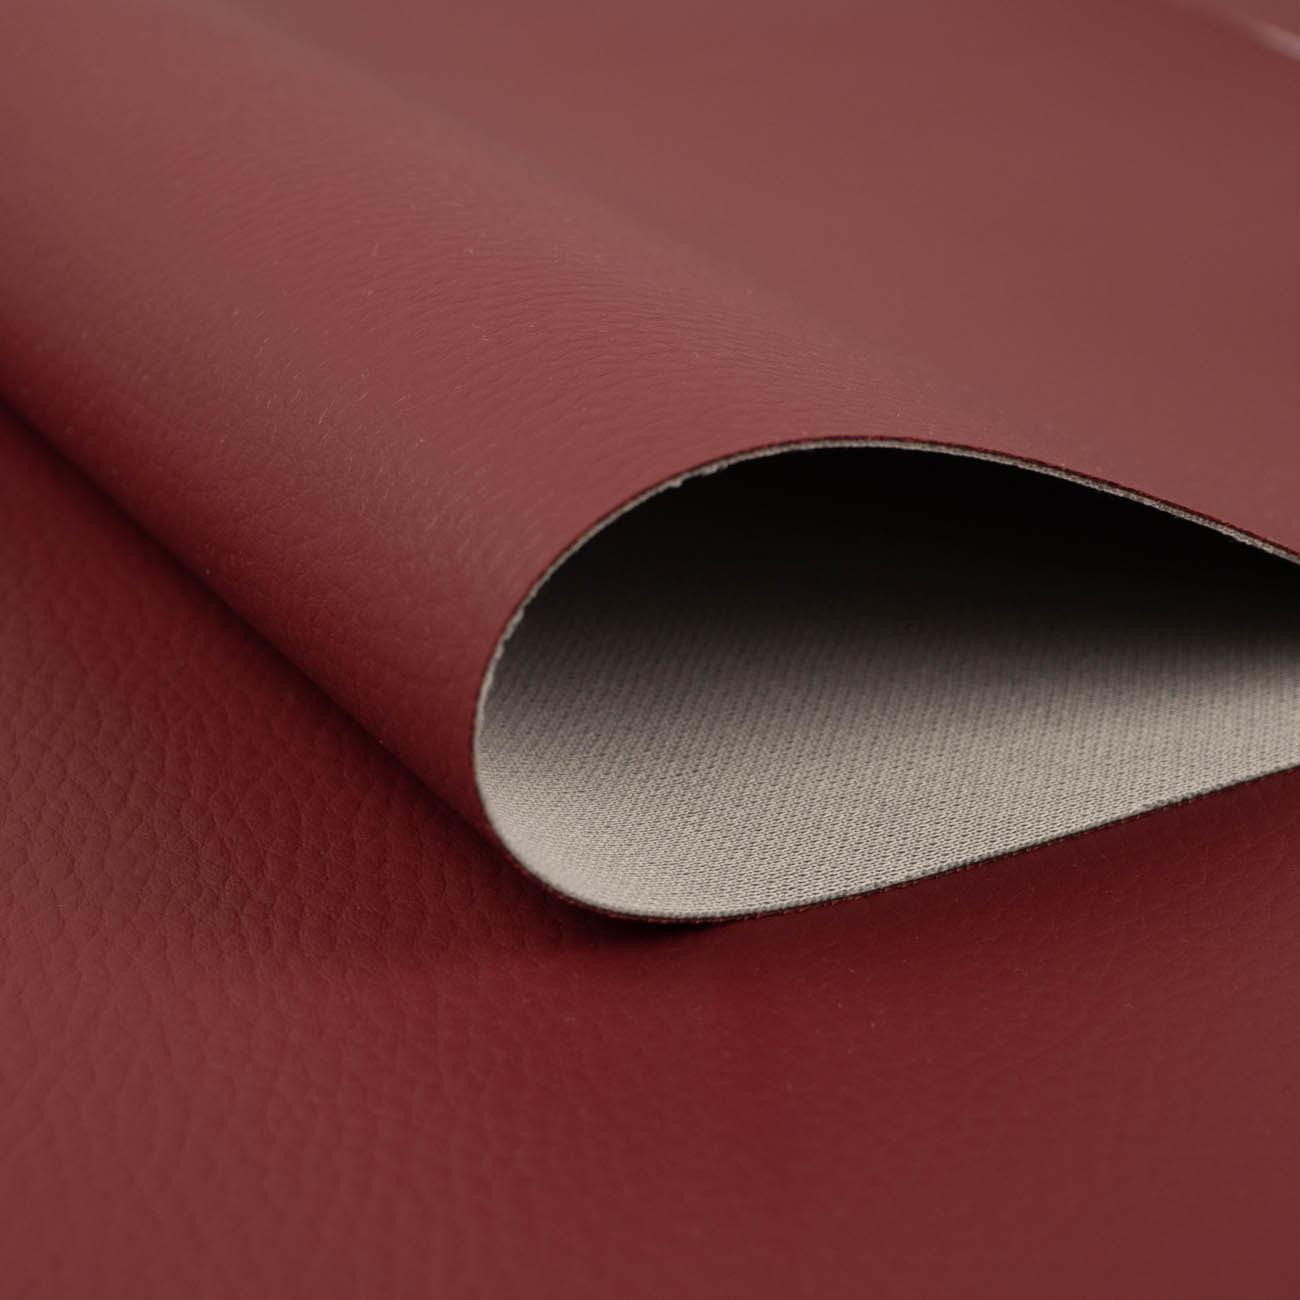 MAROON (46 cm x 50 cm) - thick pressed leatherette